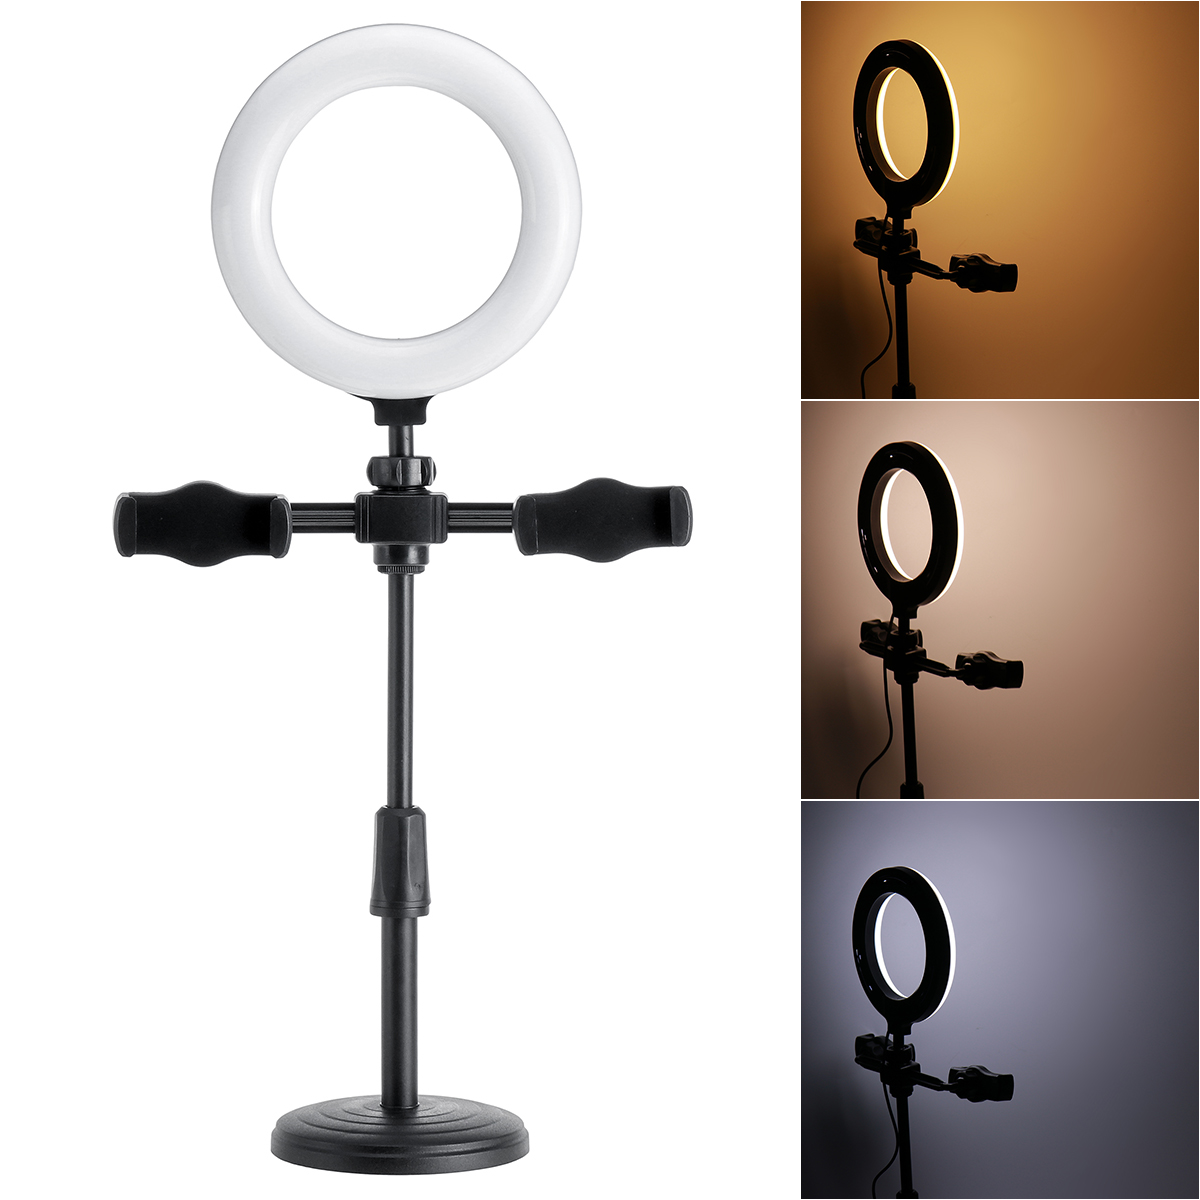 916-cm-3-Modes-of-Color-Temperature-Color-Ring-Fill-Light-with-Dual-Mobile-Phone-Holder-YouTube-Tikt-1881126-5